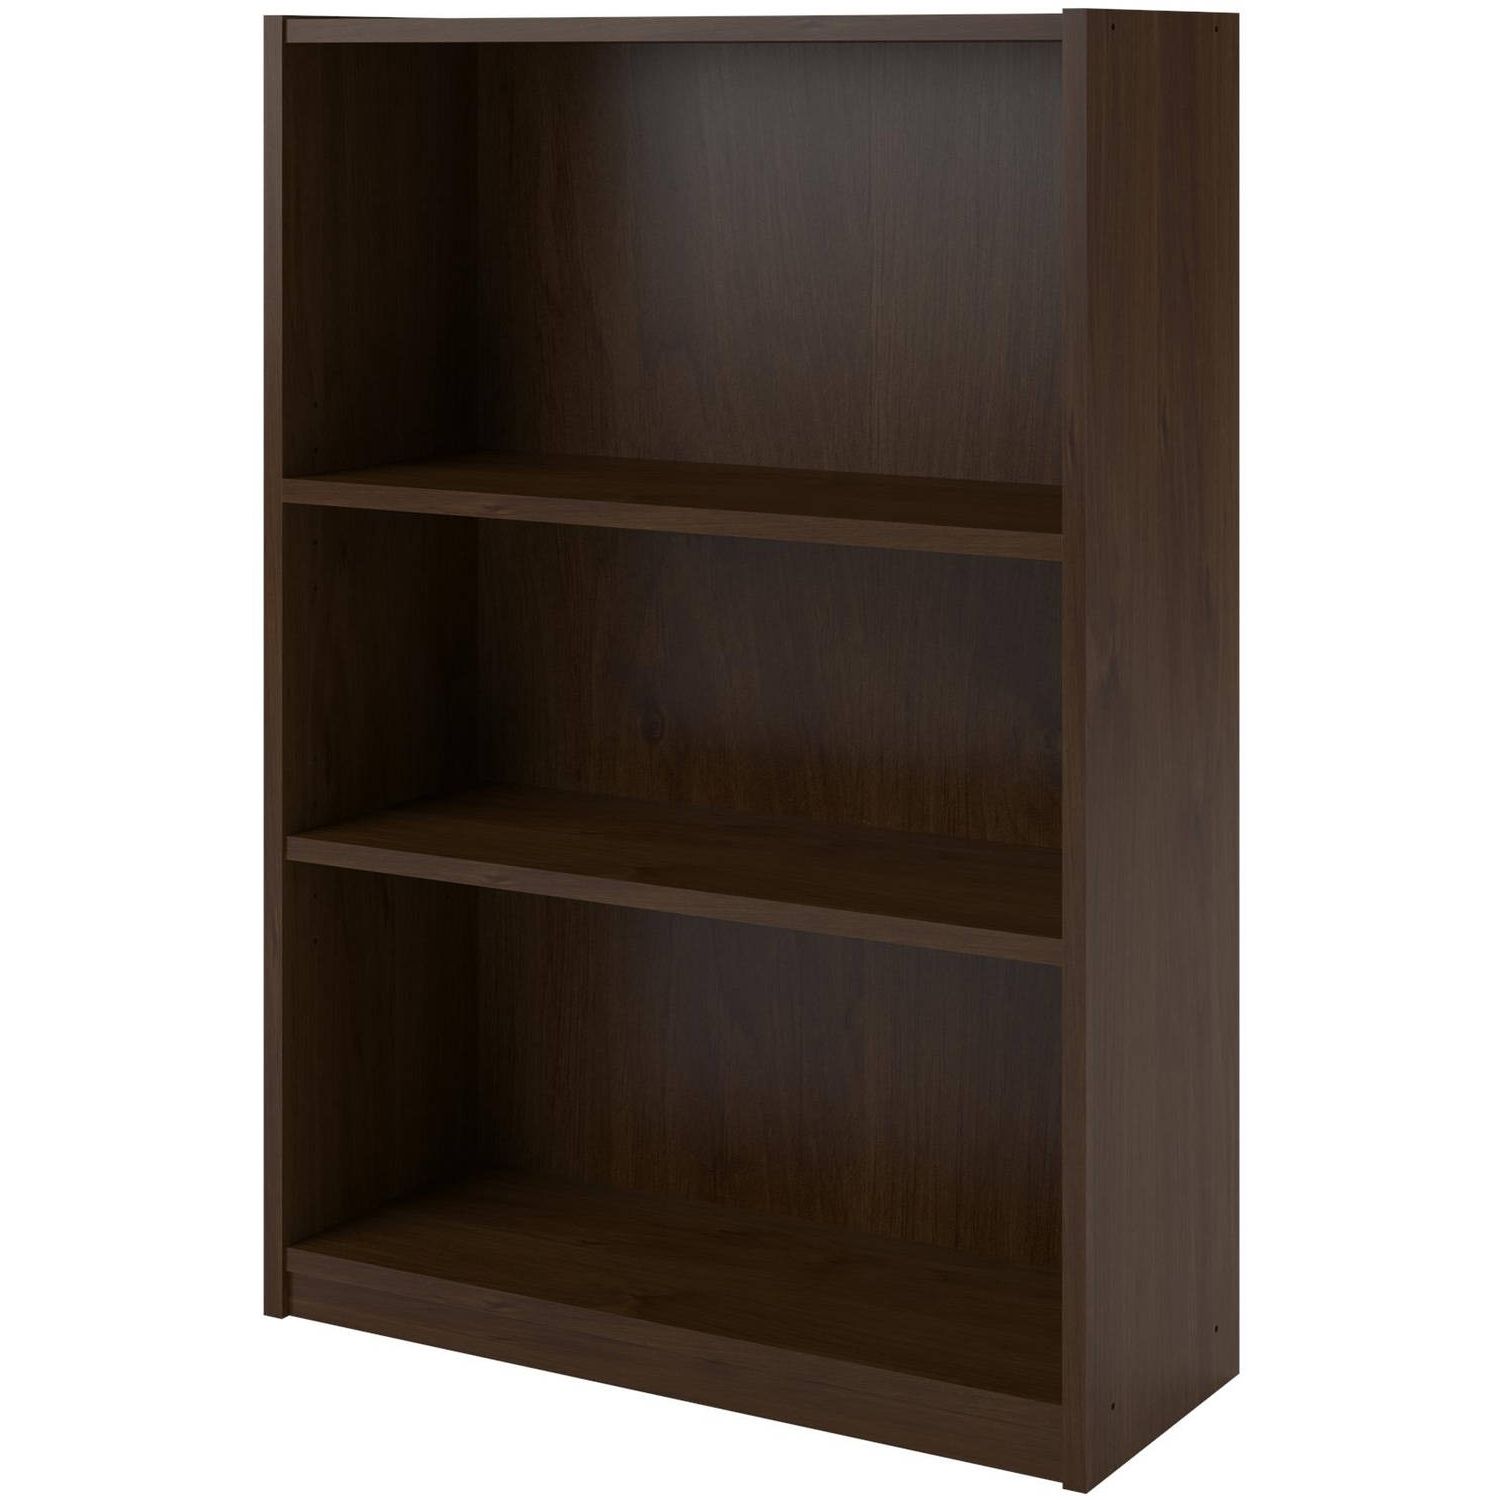 Current Product Intended For Ameriwood 3 Shelf Bookcases (View 3 of 15)